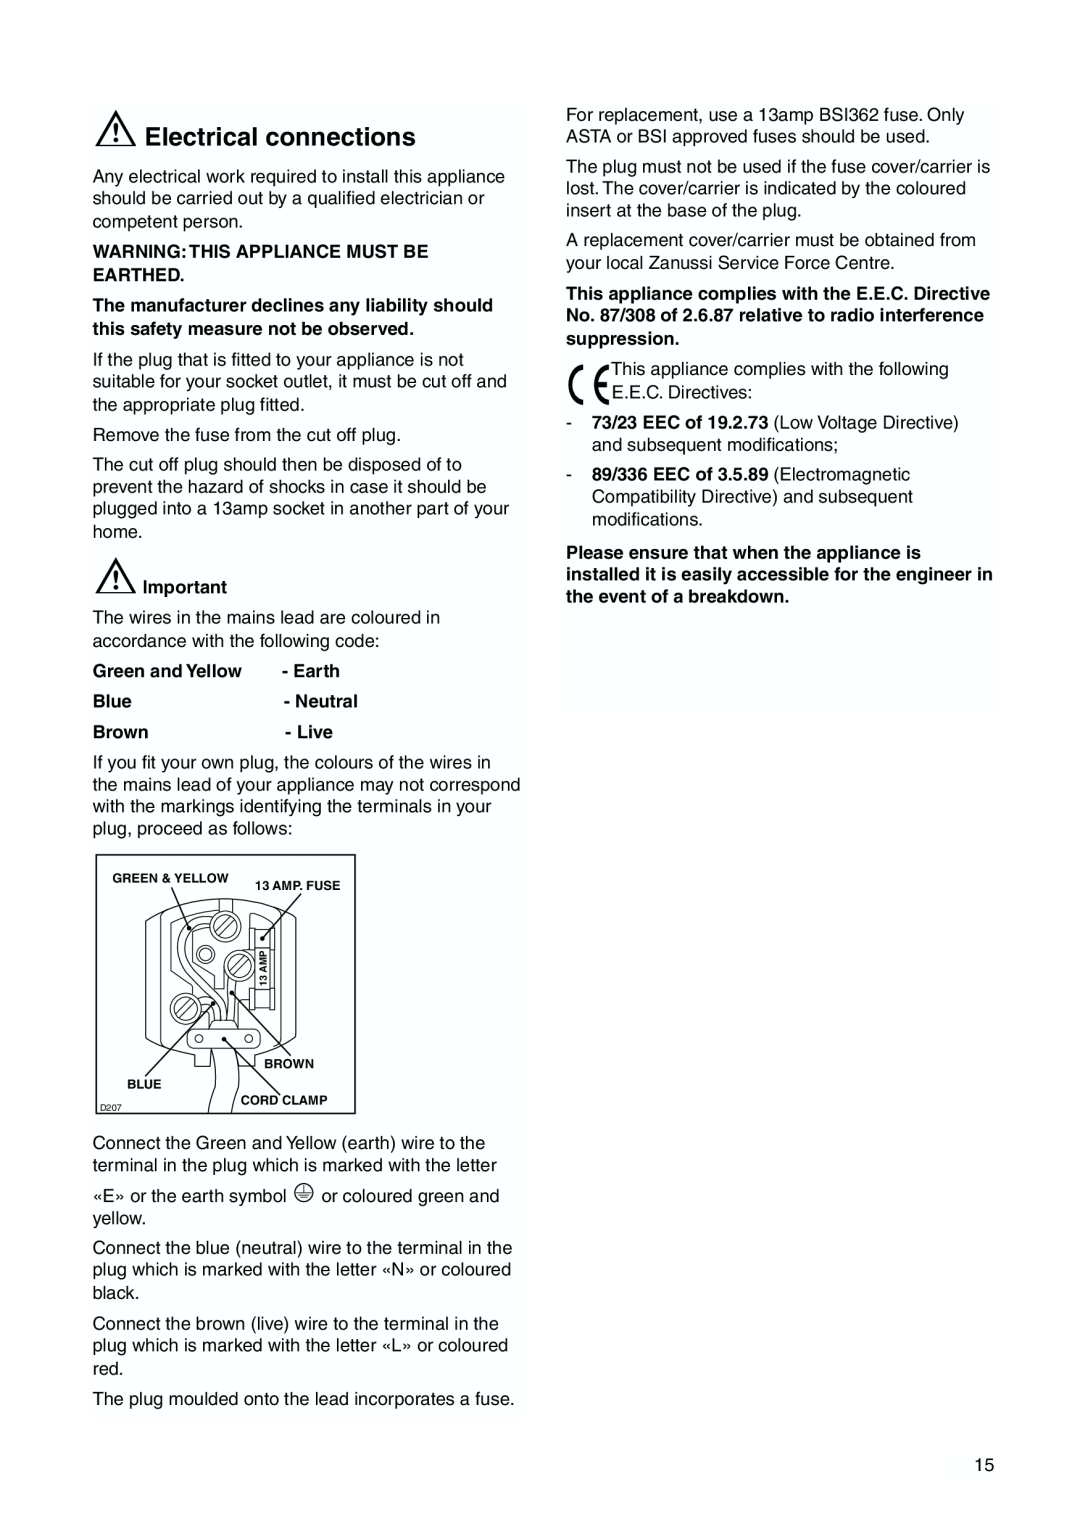 Zanussi ZBB 6244 manual Electrical connections, Warning This Appliance Must Be Earthed, Green and Yellow 